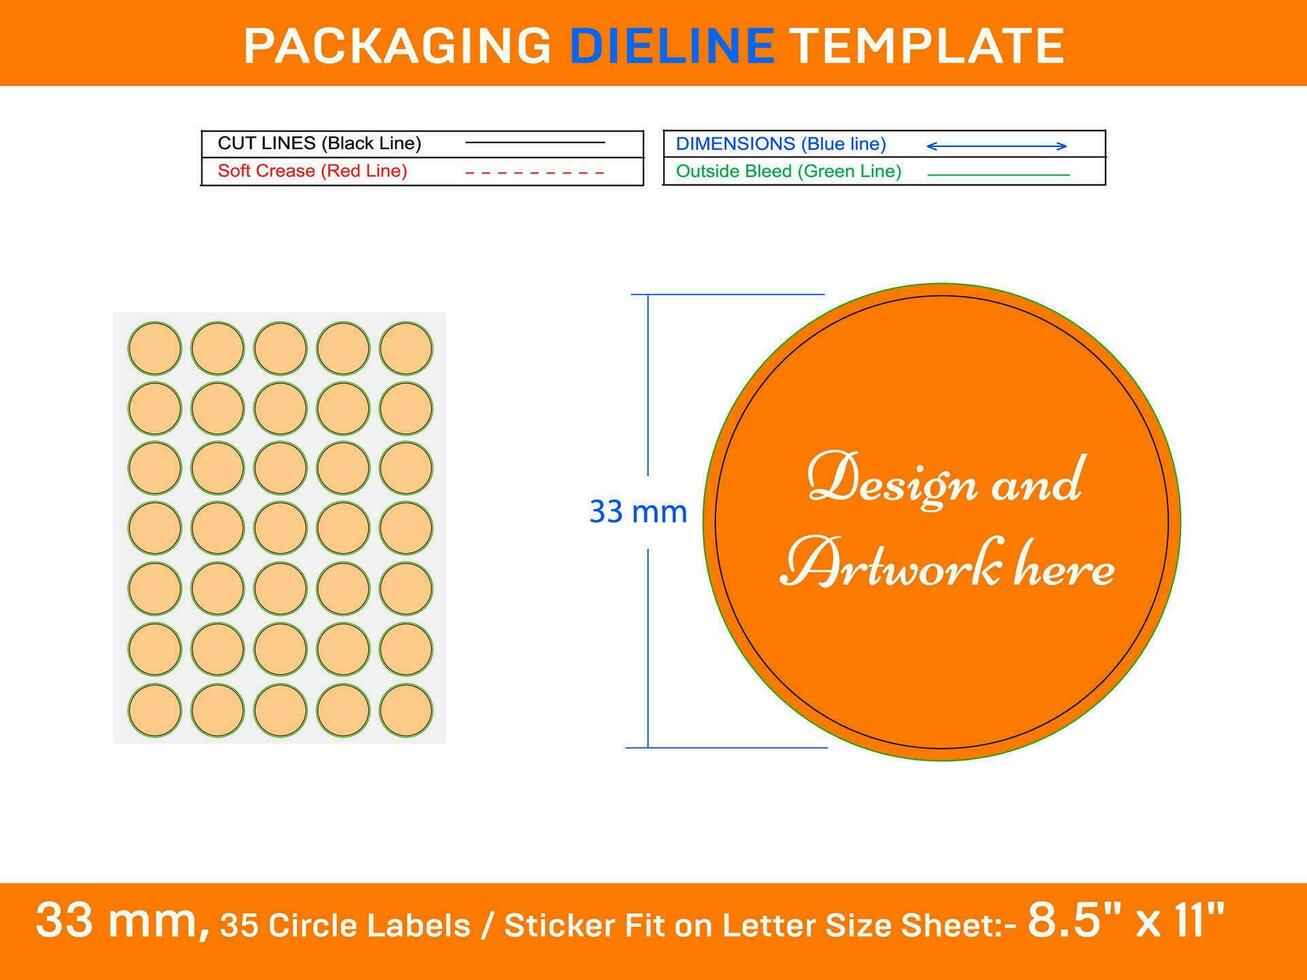 35pcs 33 mm CIRCLE or ROUND label sticker dieline template vector